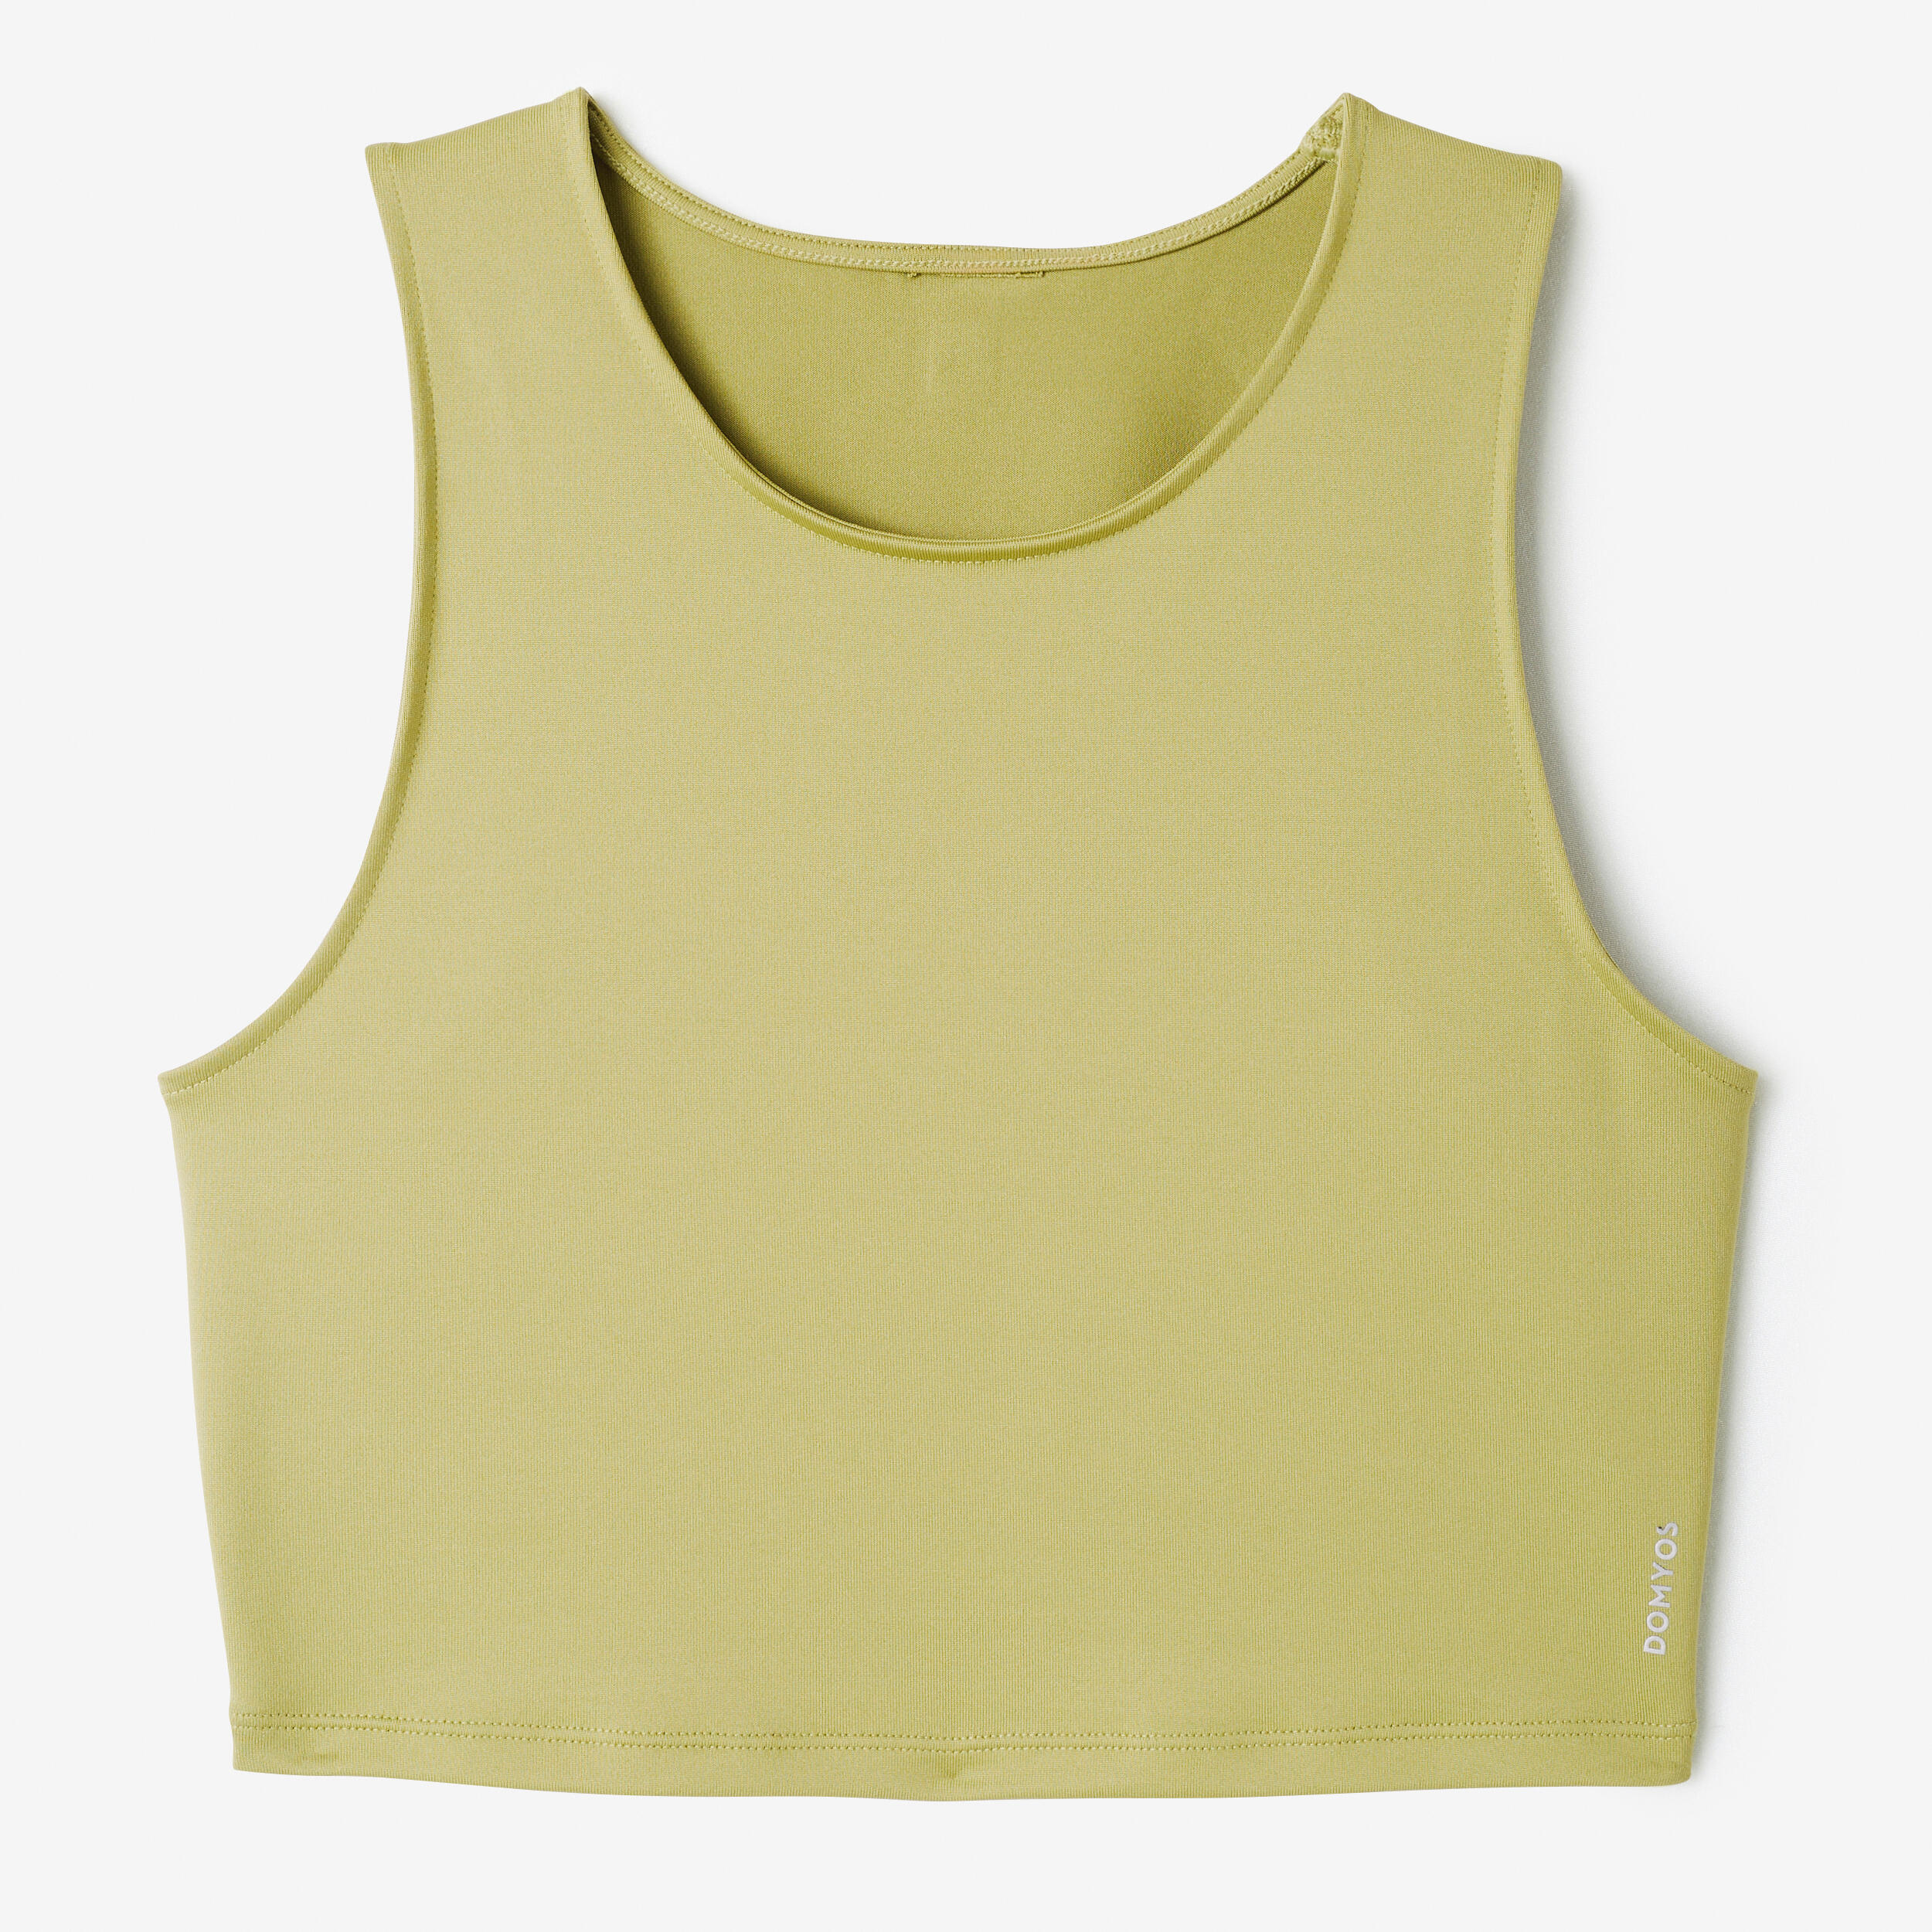 YYV Women's Workout Tank Tops Lightweight Sleeveless Shirts for Women Loose  Fit Tops for Athletic Running Tennis Yoga Yellow Green Medium